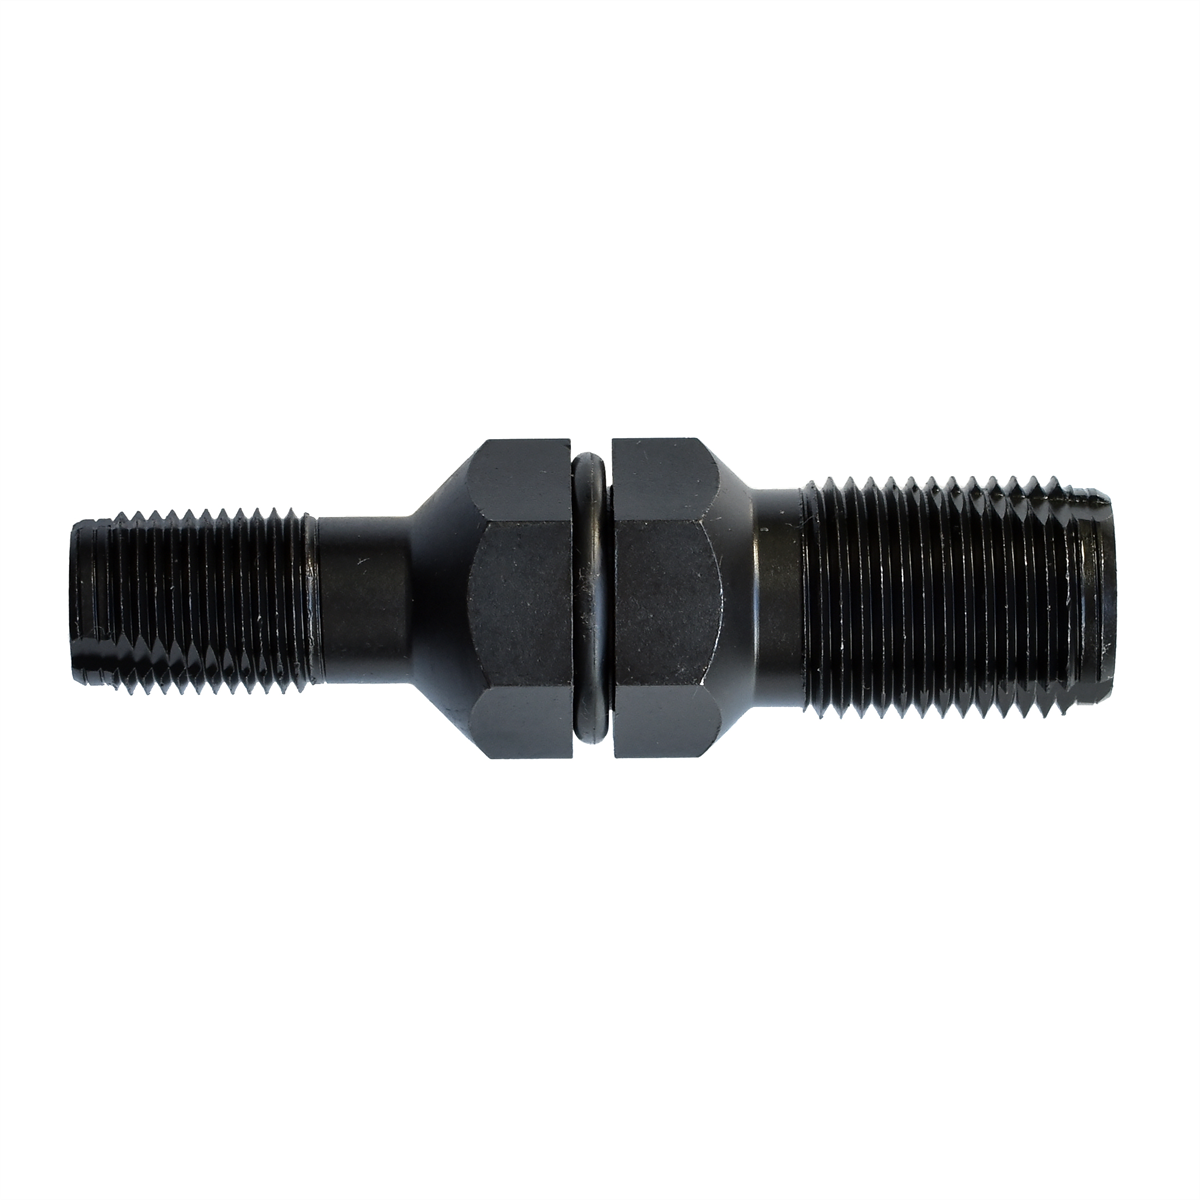 Picture of Mayhew MAY37900 14 mm Spark Plug Thread Chaser - 18 mm